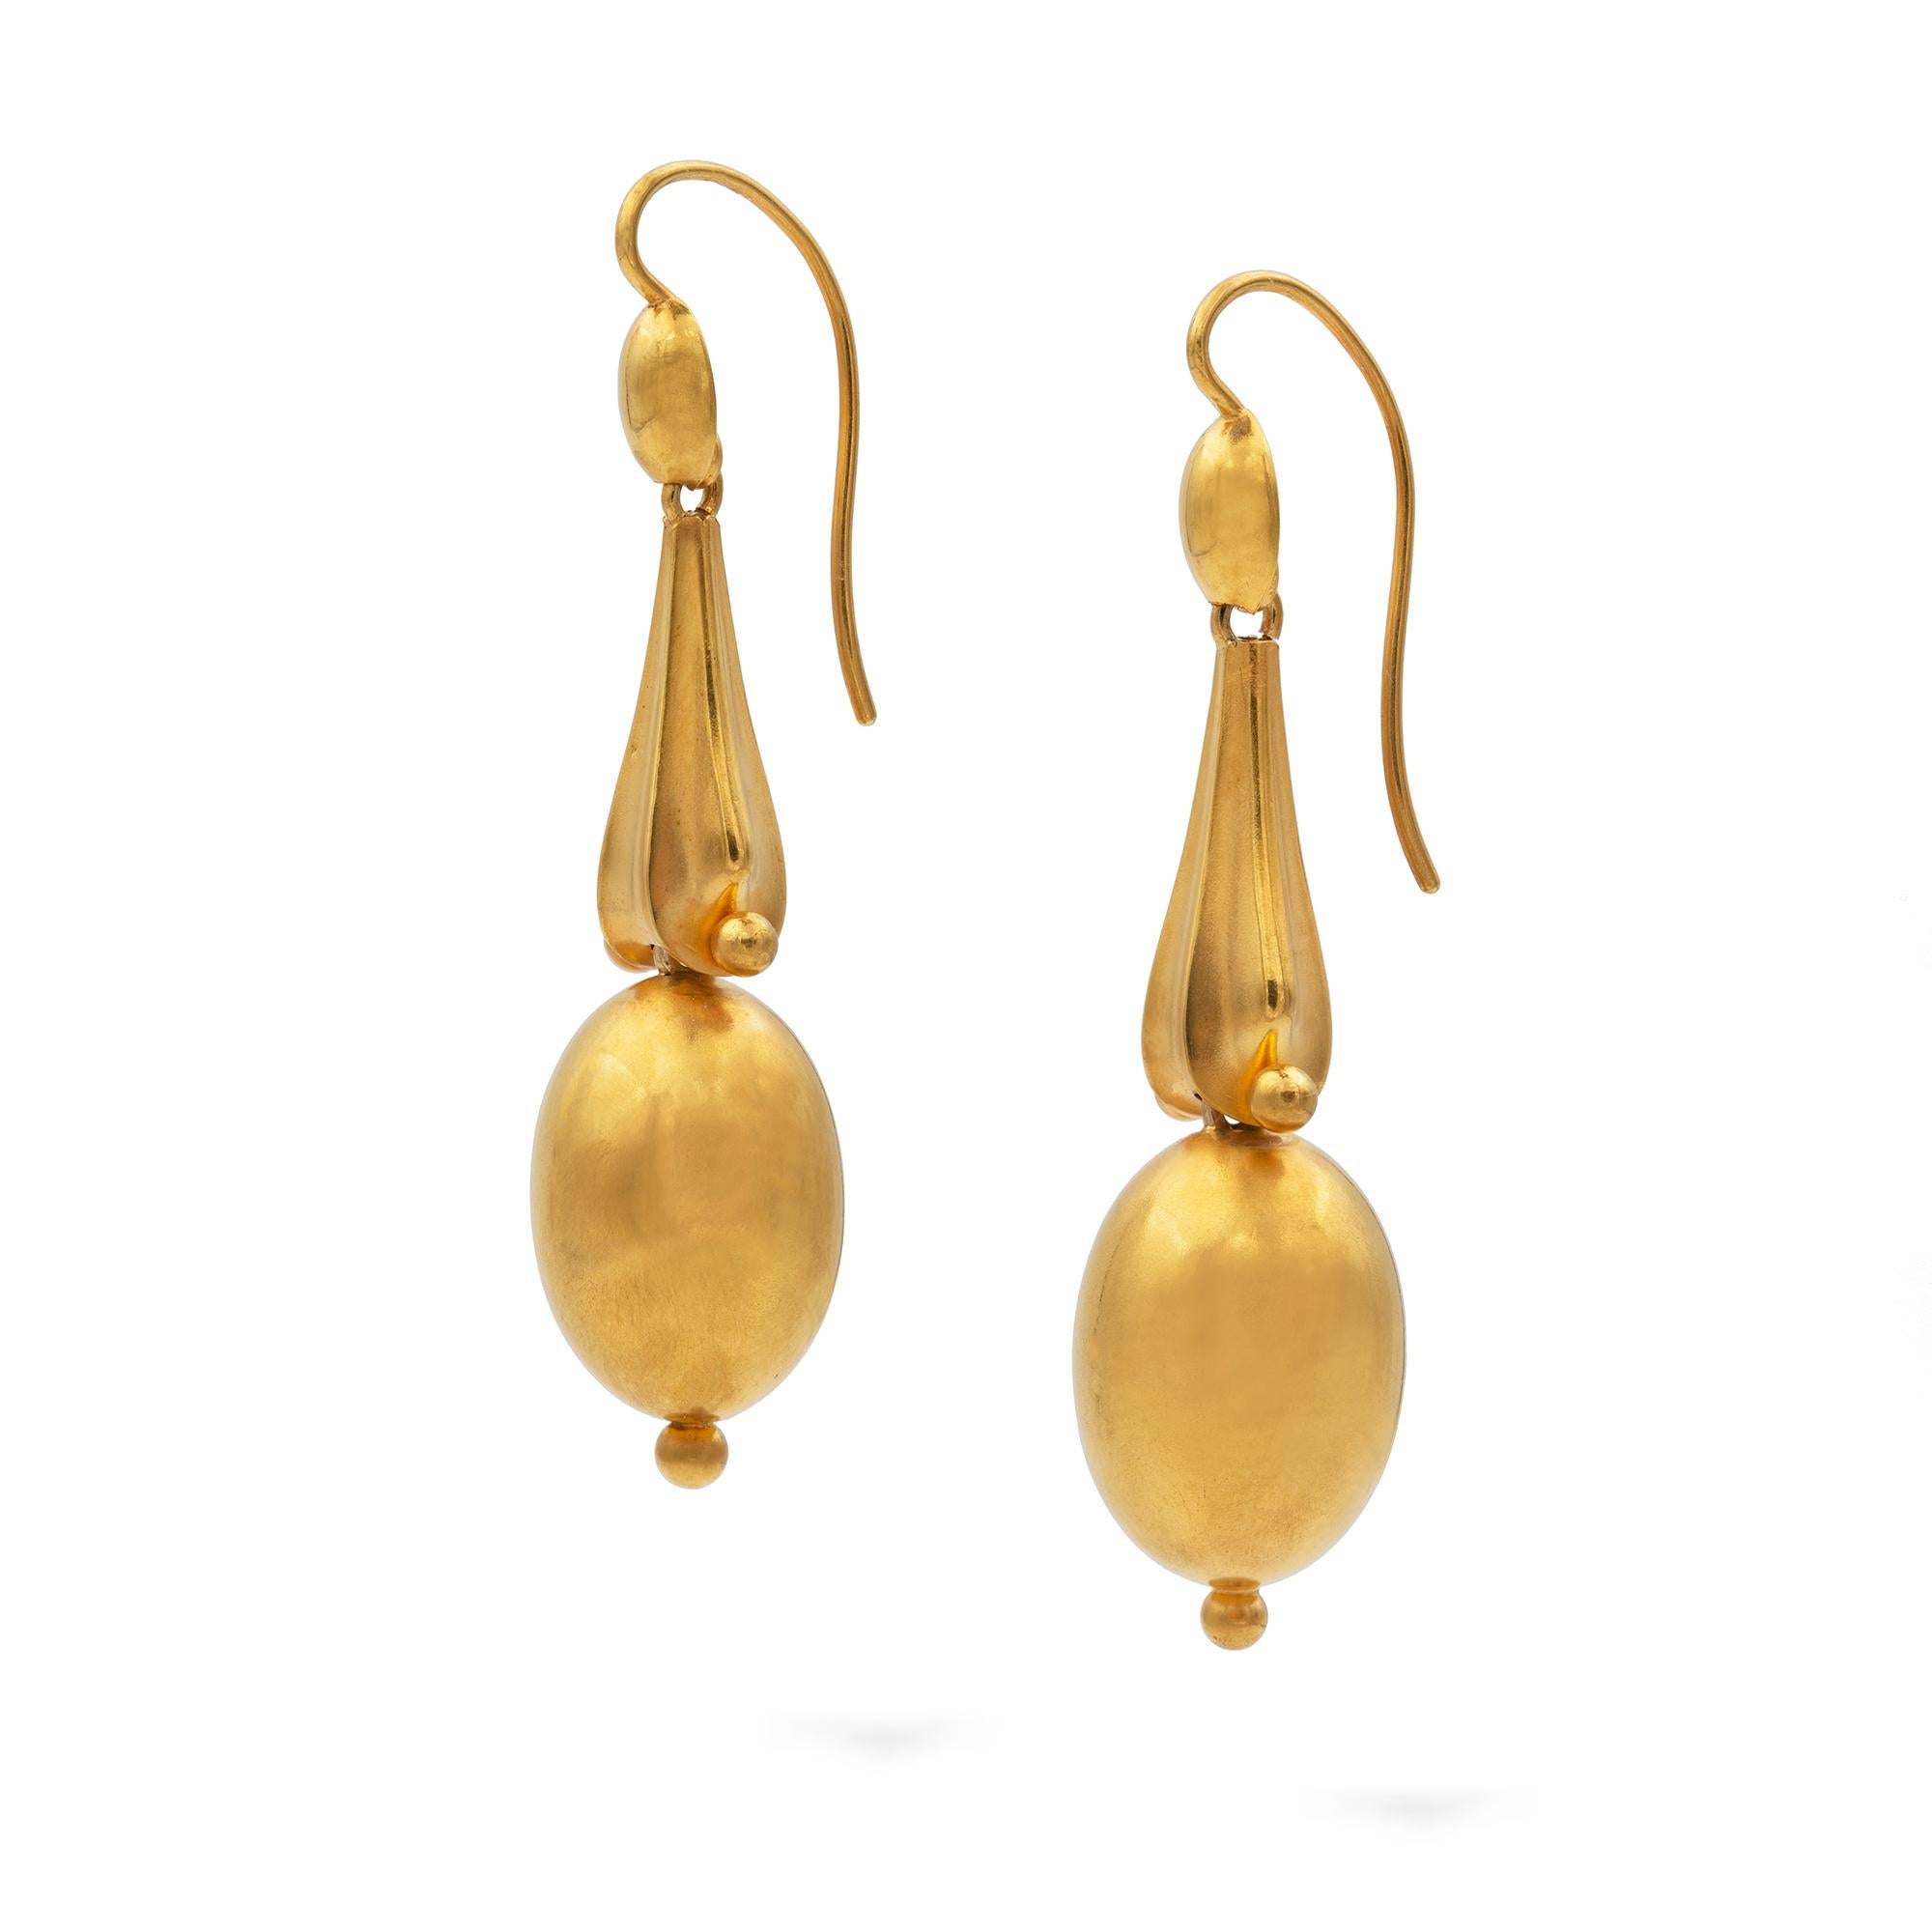 A pair of Victorian Etruscan Revival gold drop earrings, each earring consisting of a gold ovoid hollow-form drop, suspended from a gold curved hexagonal pyramid section, with a gold oval top and shepherds hook fitting, circa 1880, measuring 